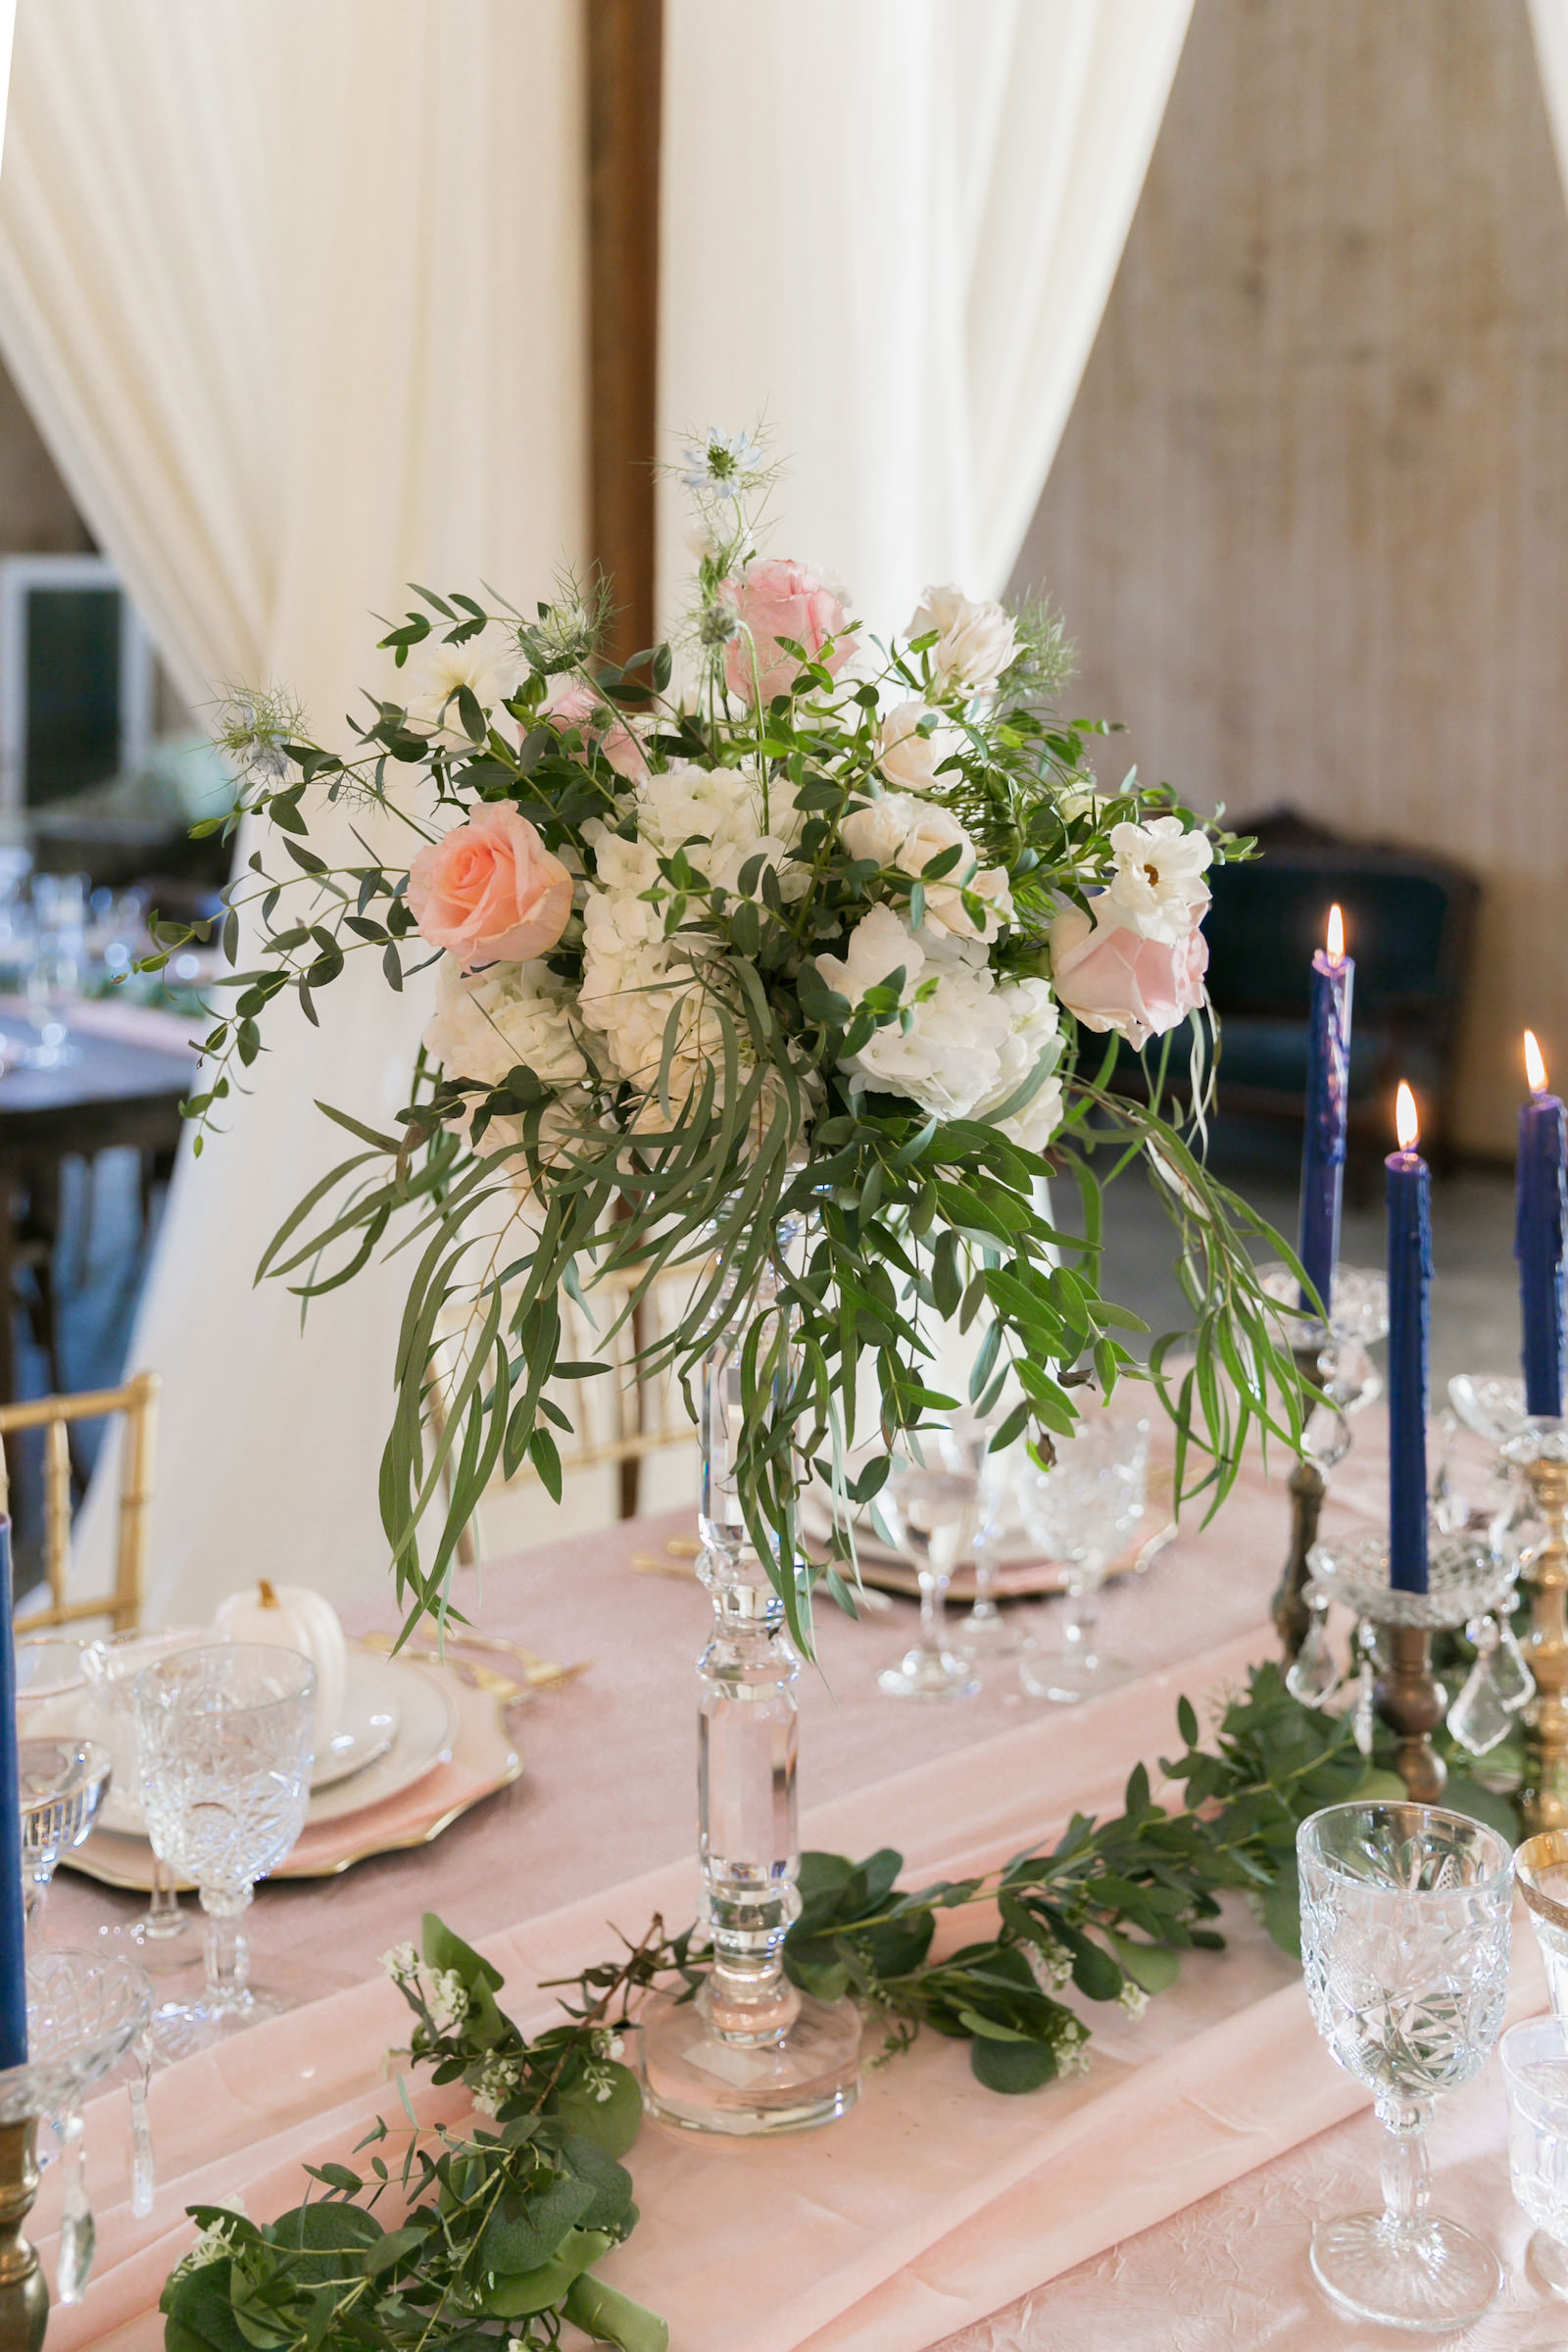 Blush and White Floral Centerpieces with Greenery and Navy Candles